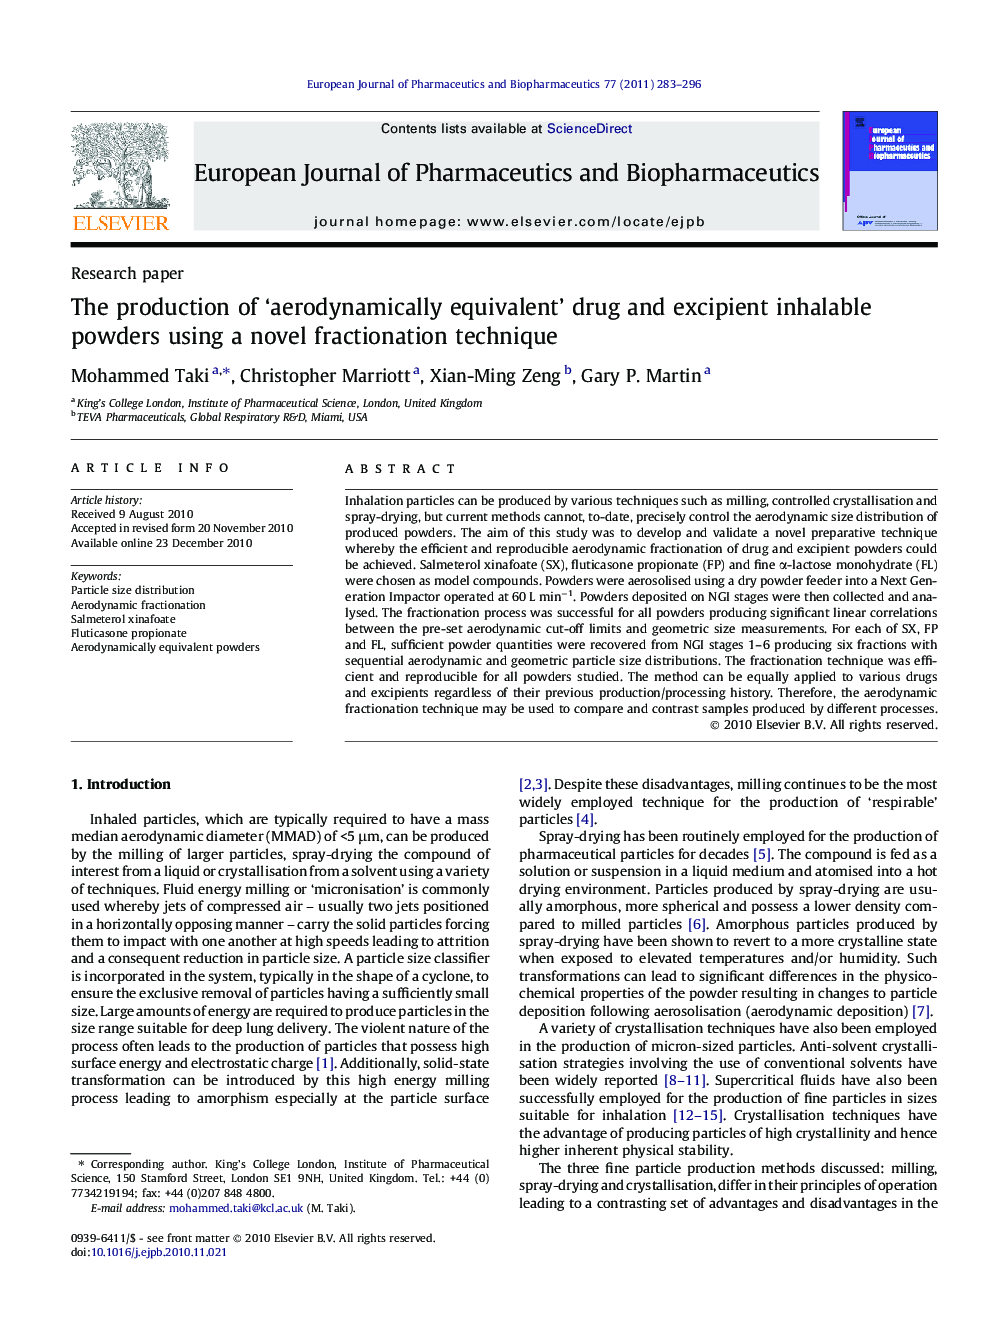 The production of 'aerodynamically equivalent' drug and excipient inhalable powders using a novel fractionation technique